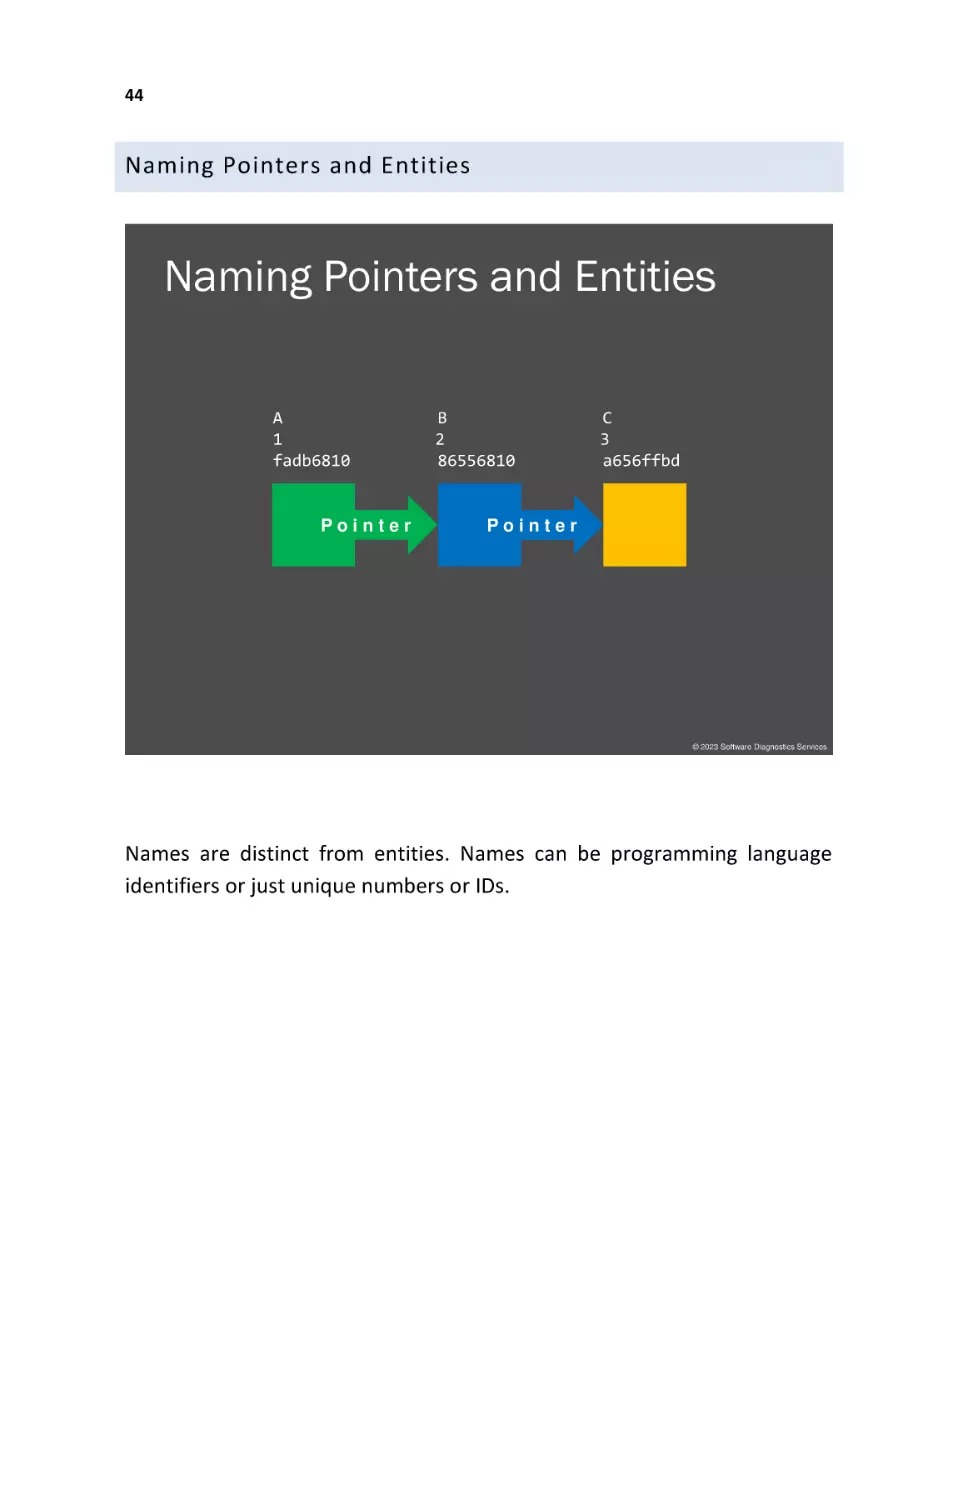 Naming Pointers and Entities